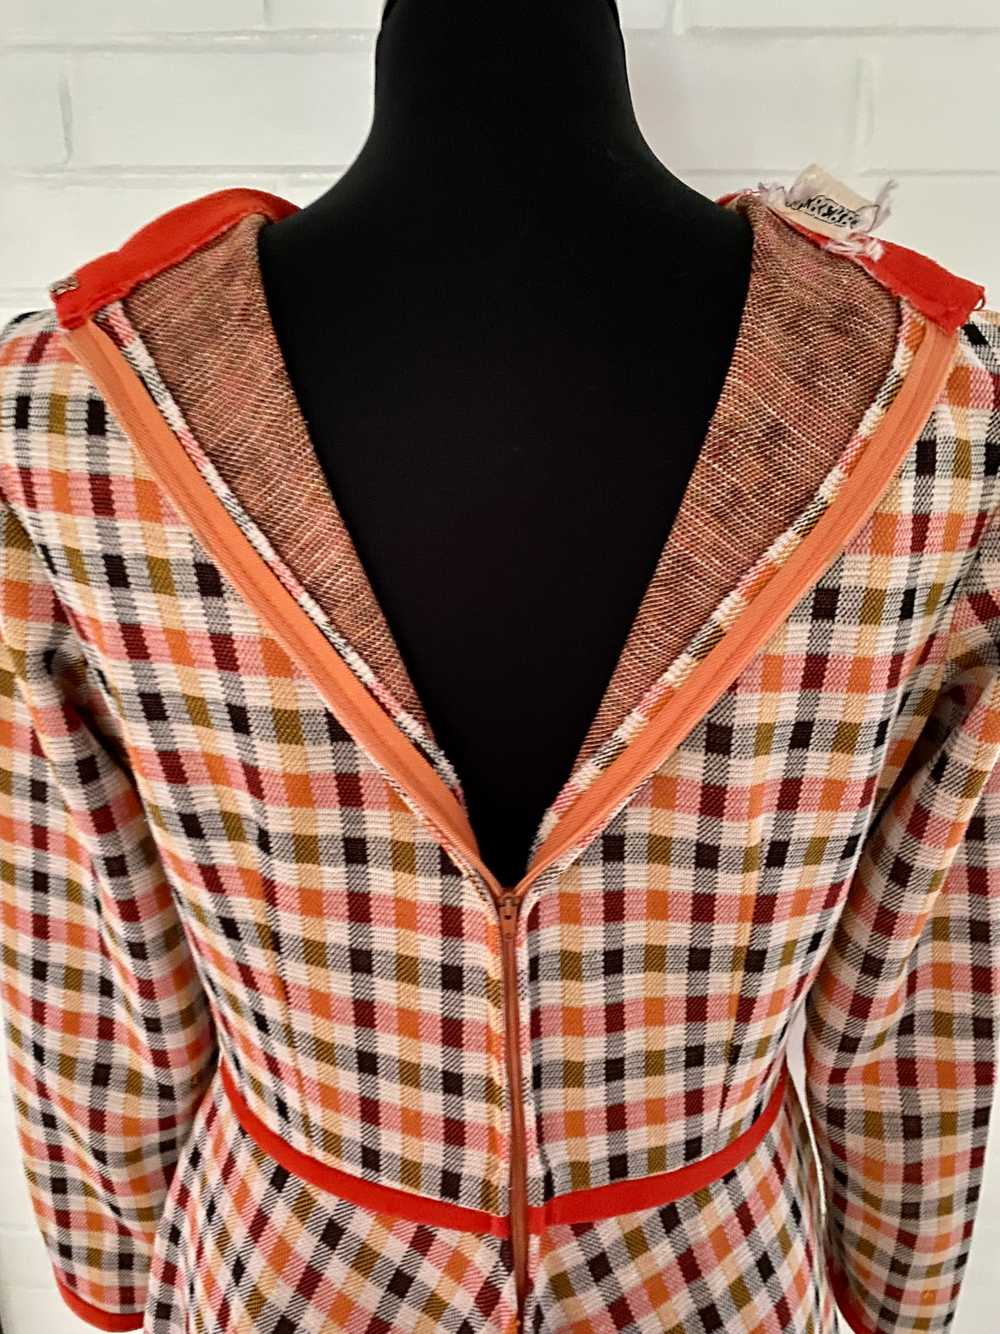 Late 60s/ Early 70s Bayberry Plaid Dress - image 7